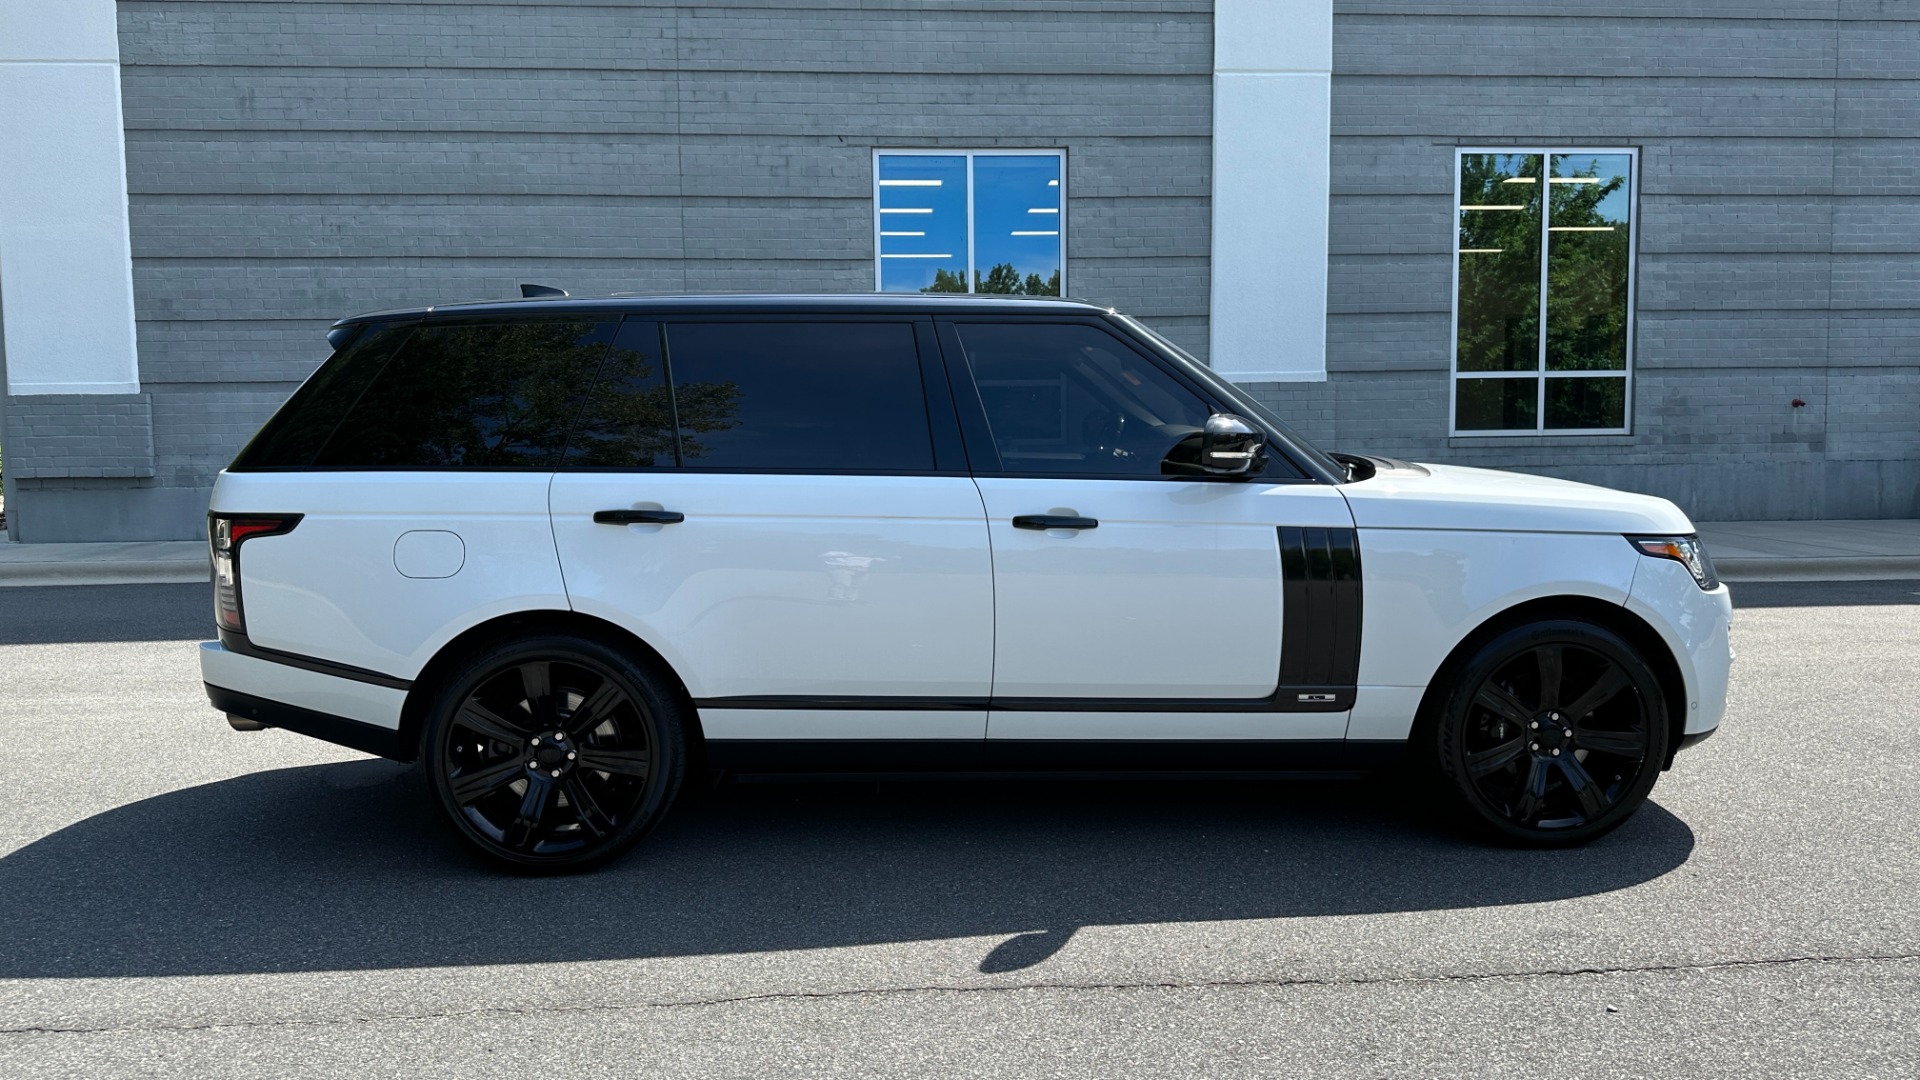 Used 2017 Land Rover Range Rover SV AUTOBIOGRAPHY / LOADED / REAR MASSAGE / EXECUTIVE SEATING / LWB for sale $75,900 at Formula Imports in Charlotte NC 28227 7